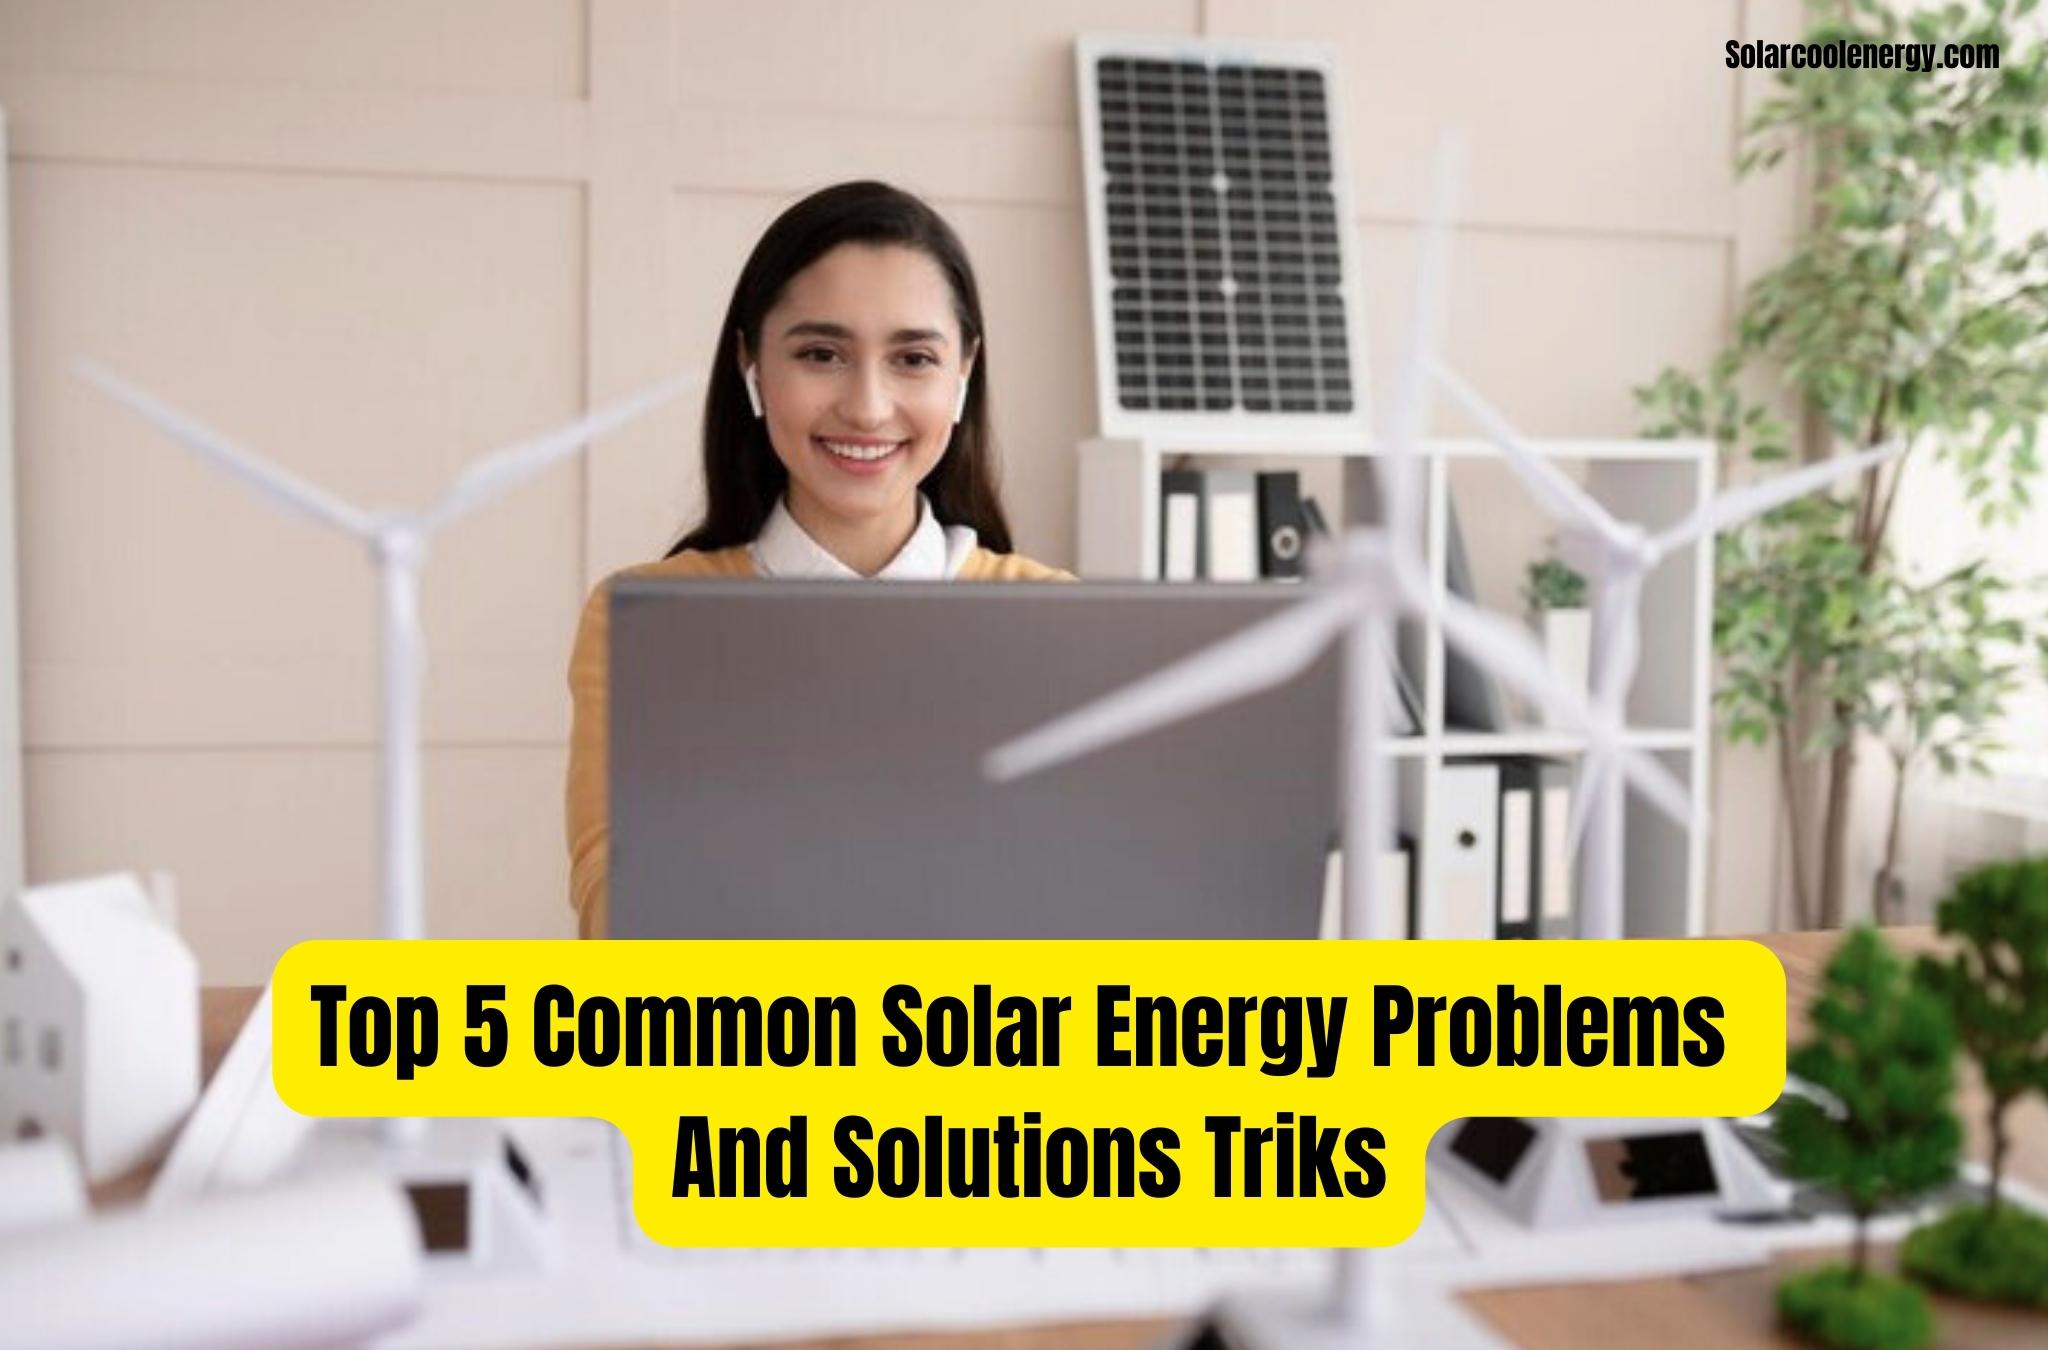 Solar Energy Problems And Solutions